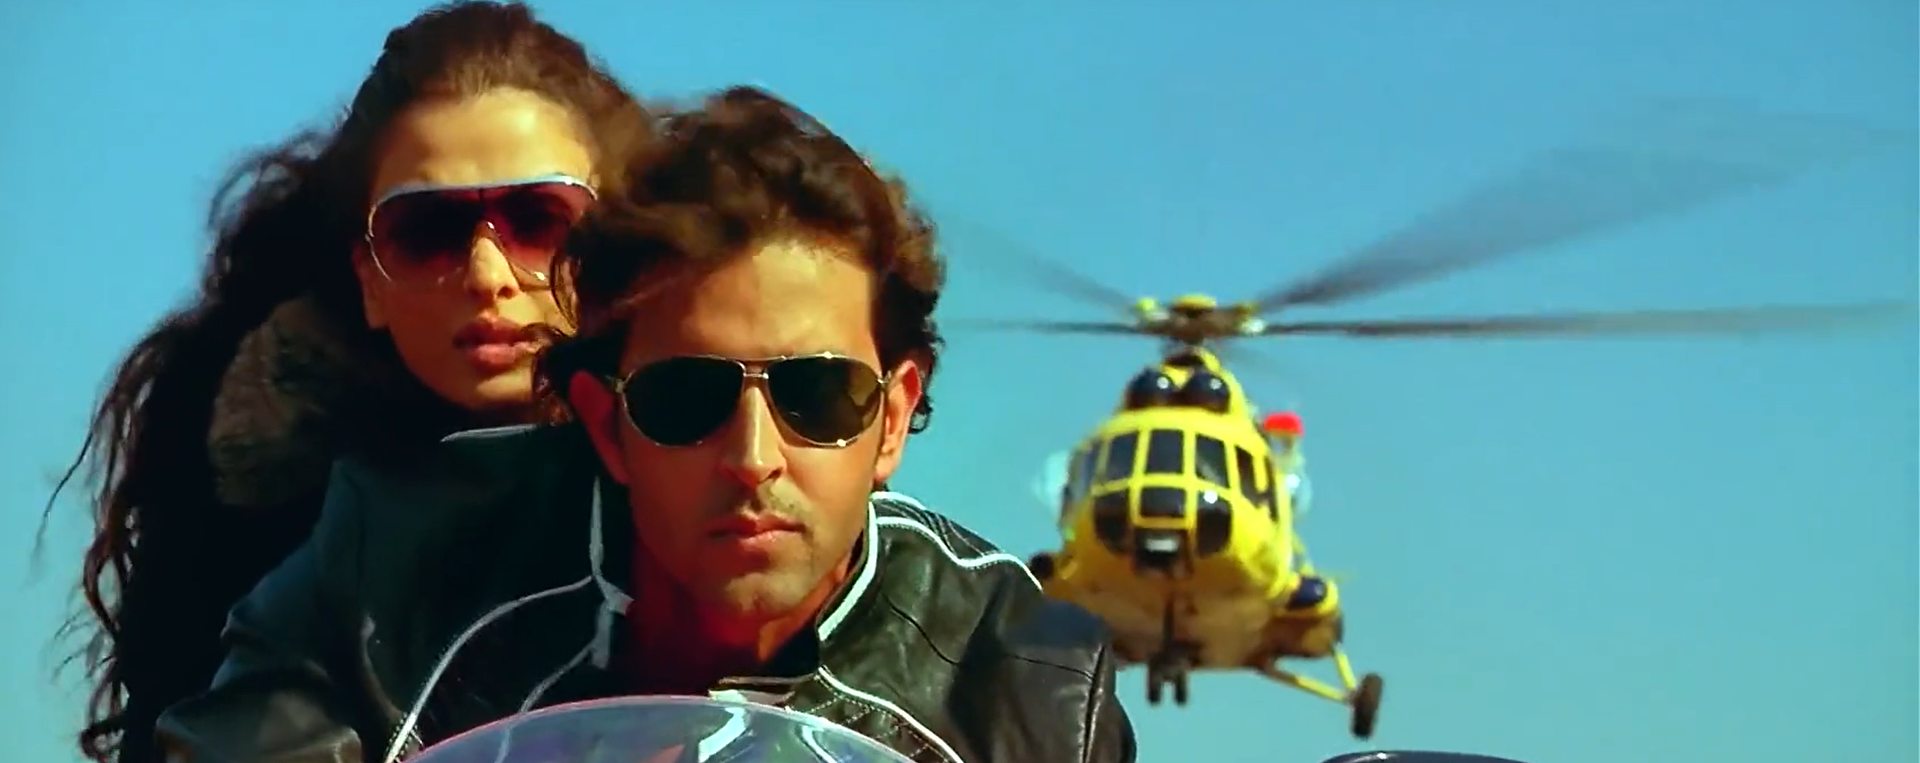 Aishwarya Rai and Hrithik Roshan on a bike being hunted down by a helicopter